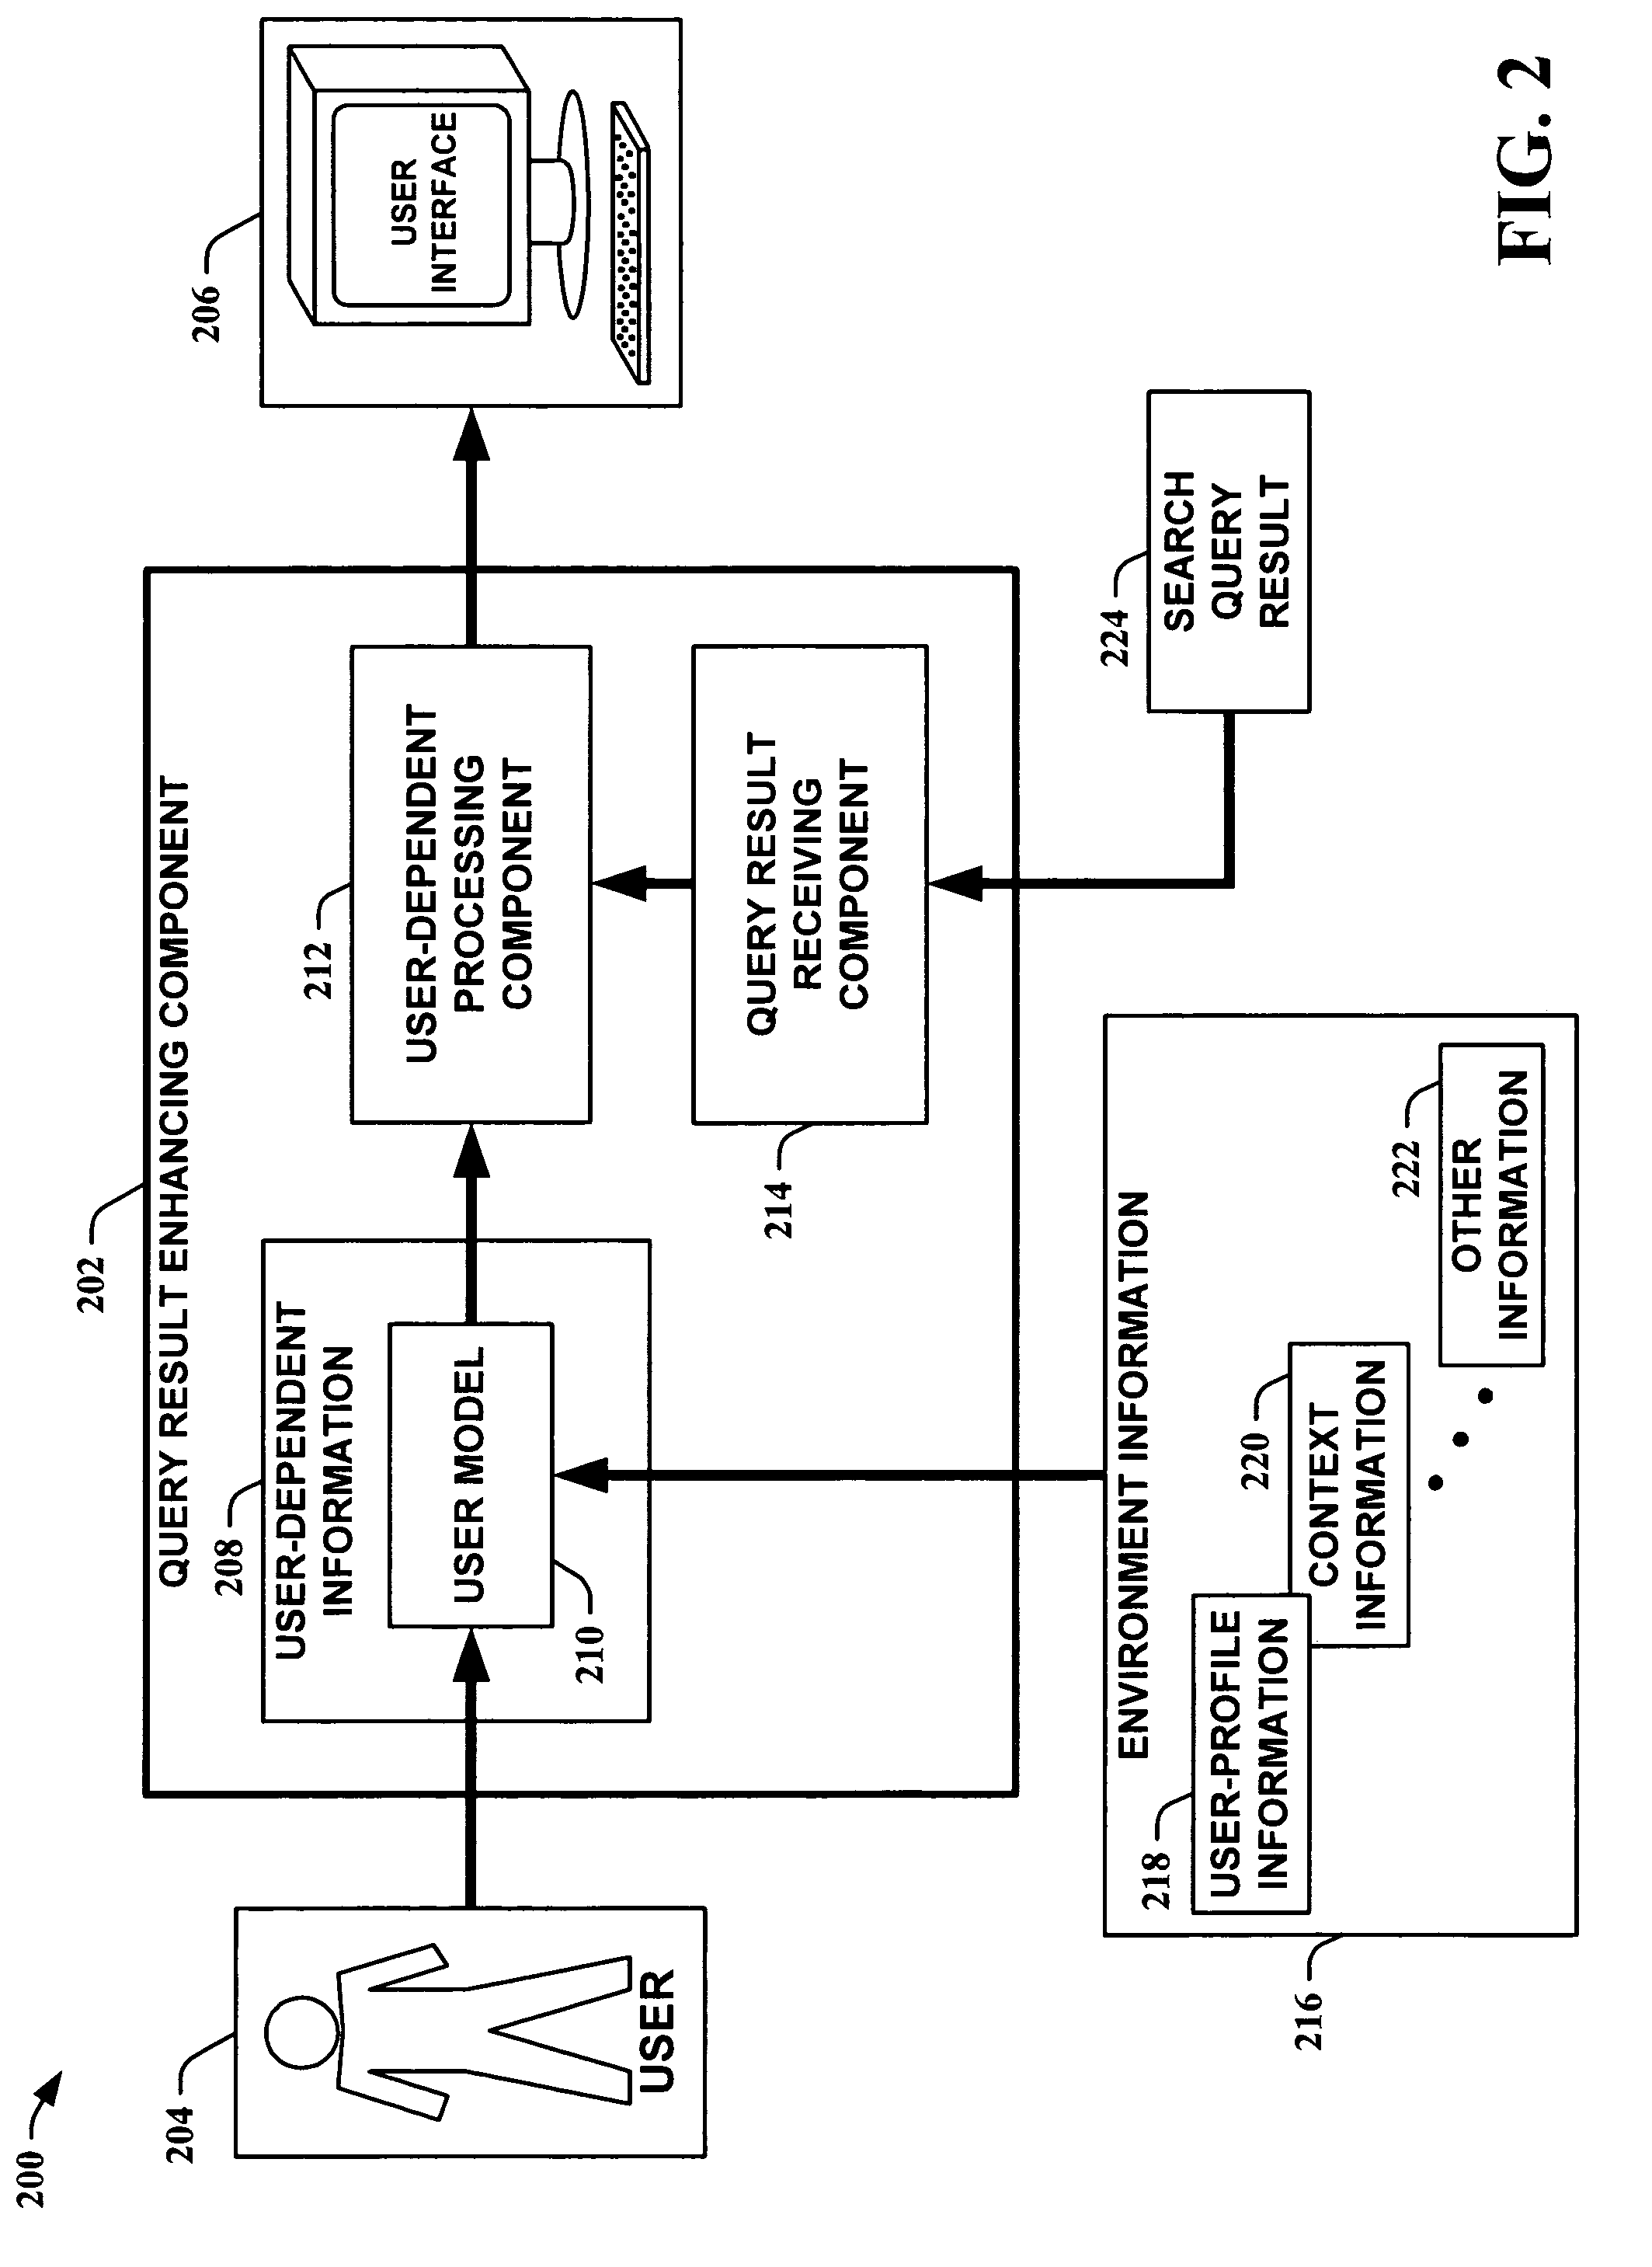 Systems and methods for enhancing search query results